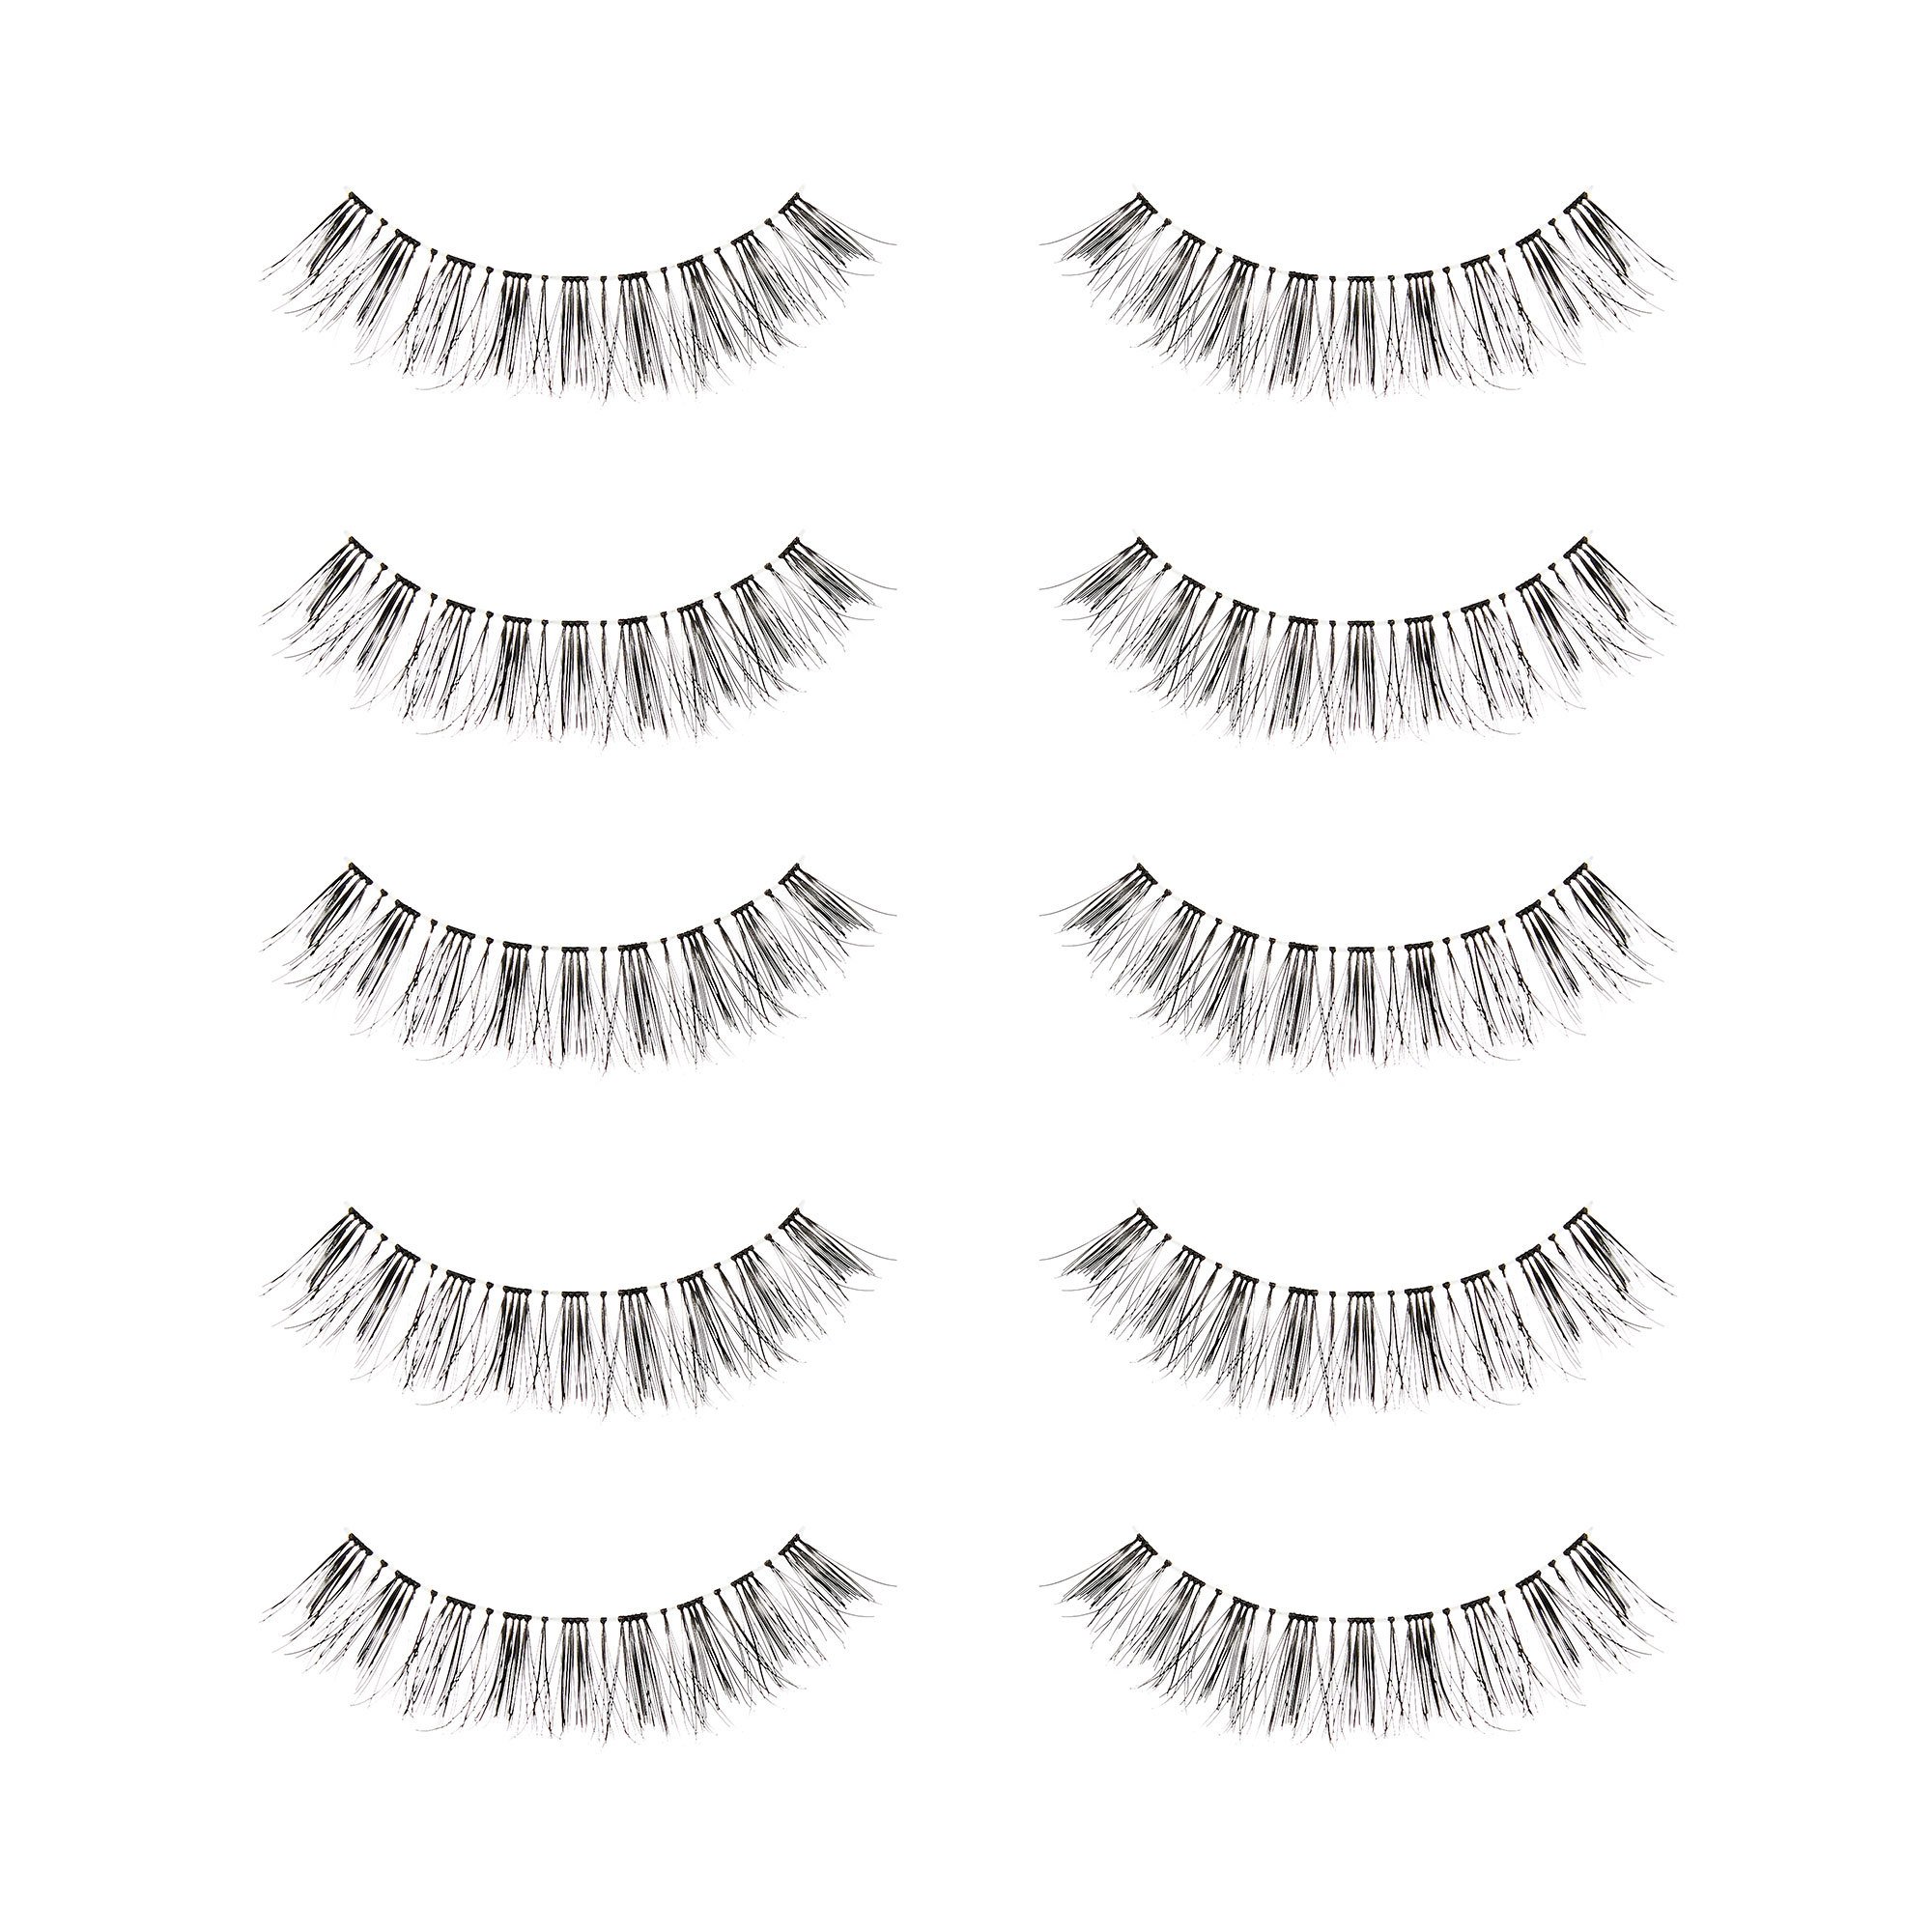 5 Pack Feather Wispy Lashes